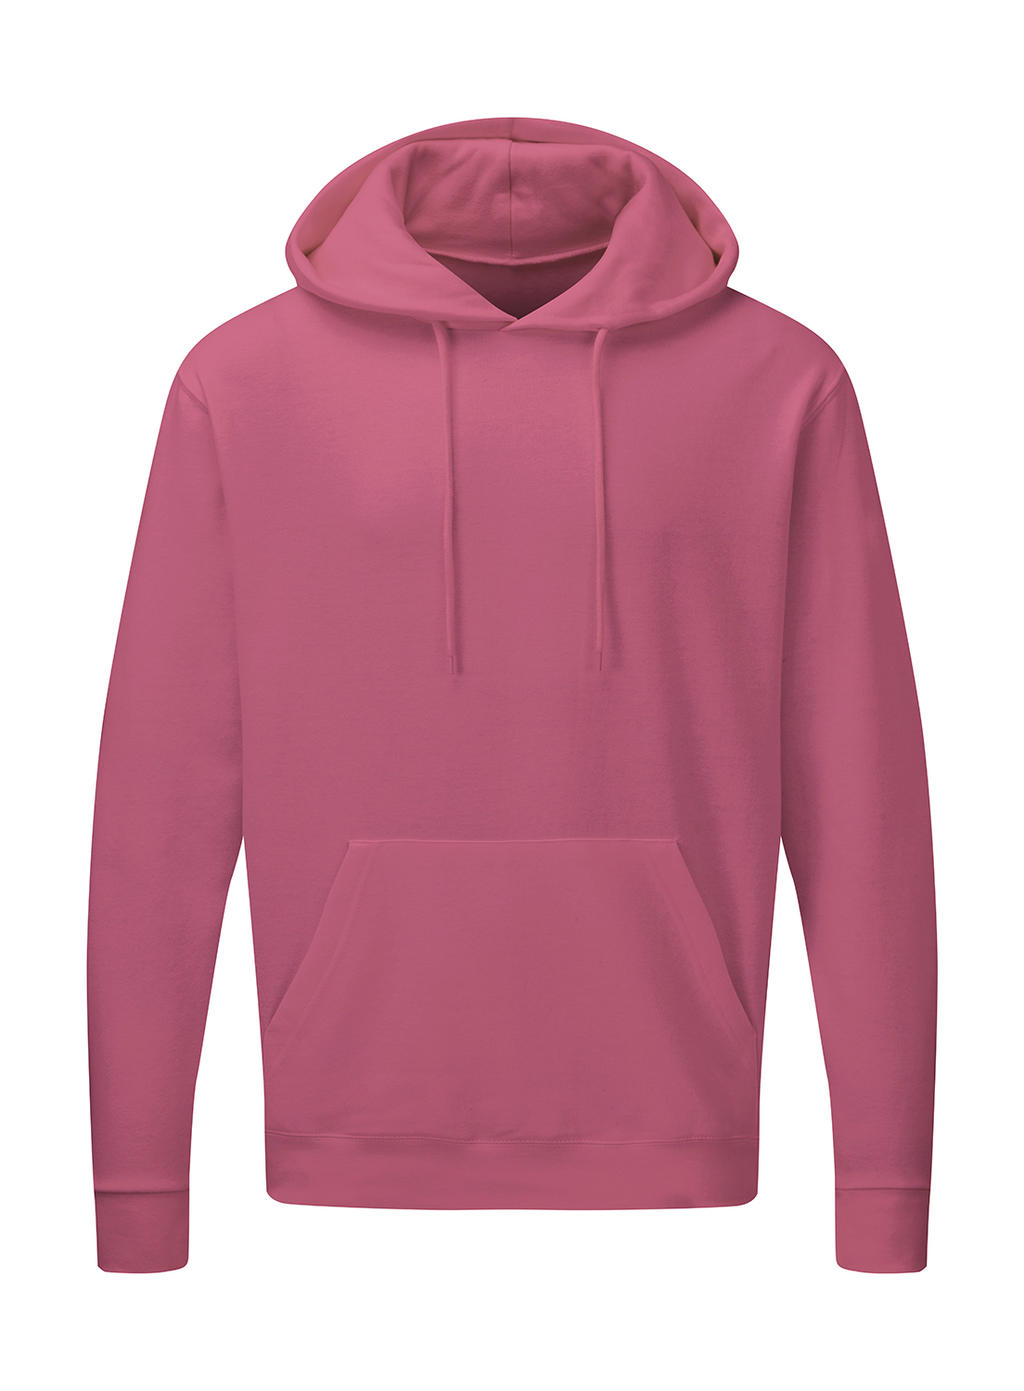  Mens Hooded Sweatshirt in Farbe Cassis